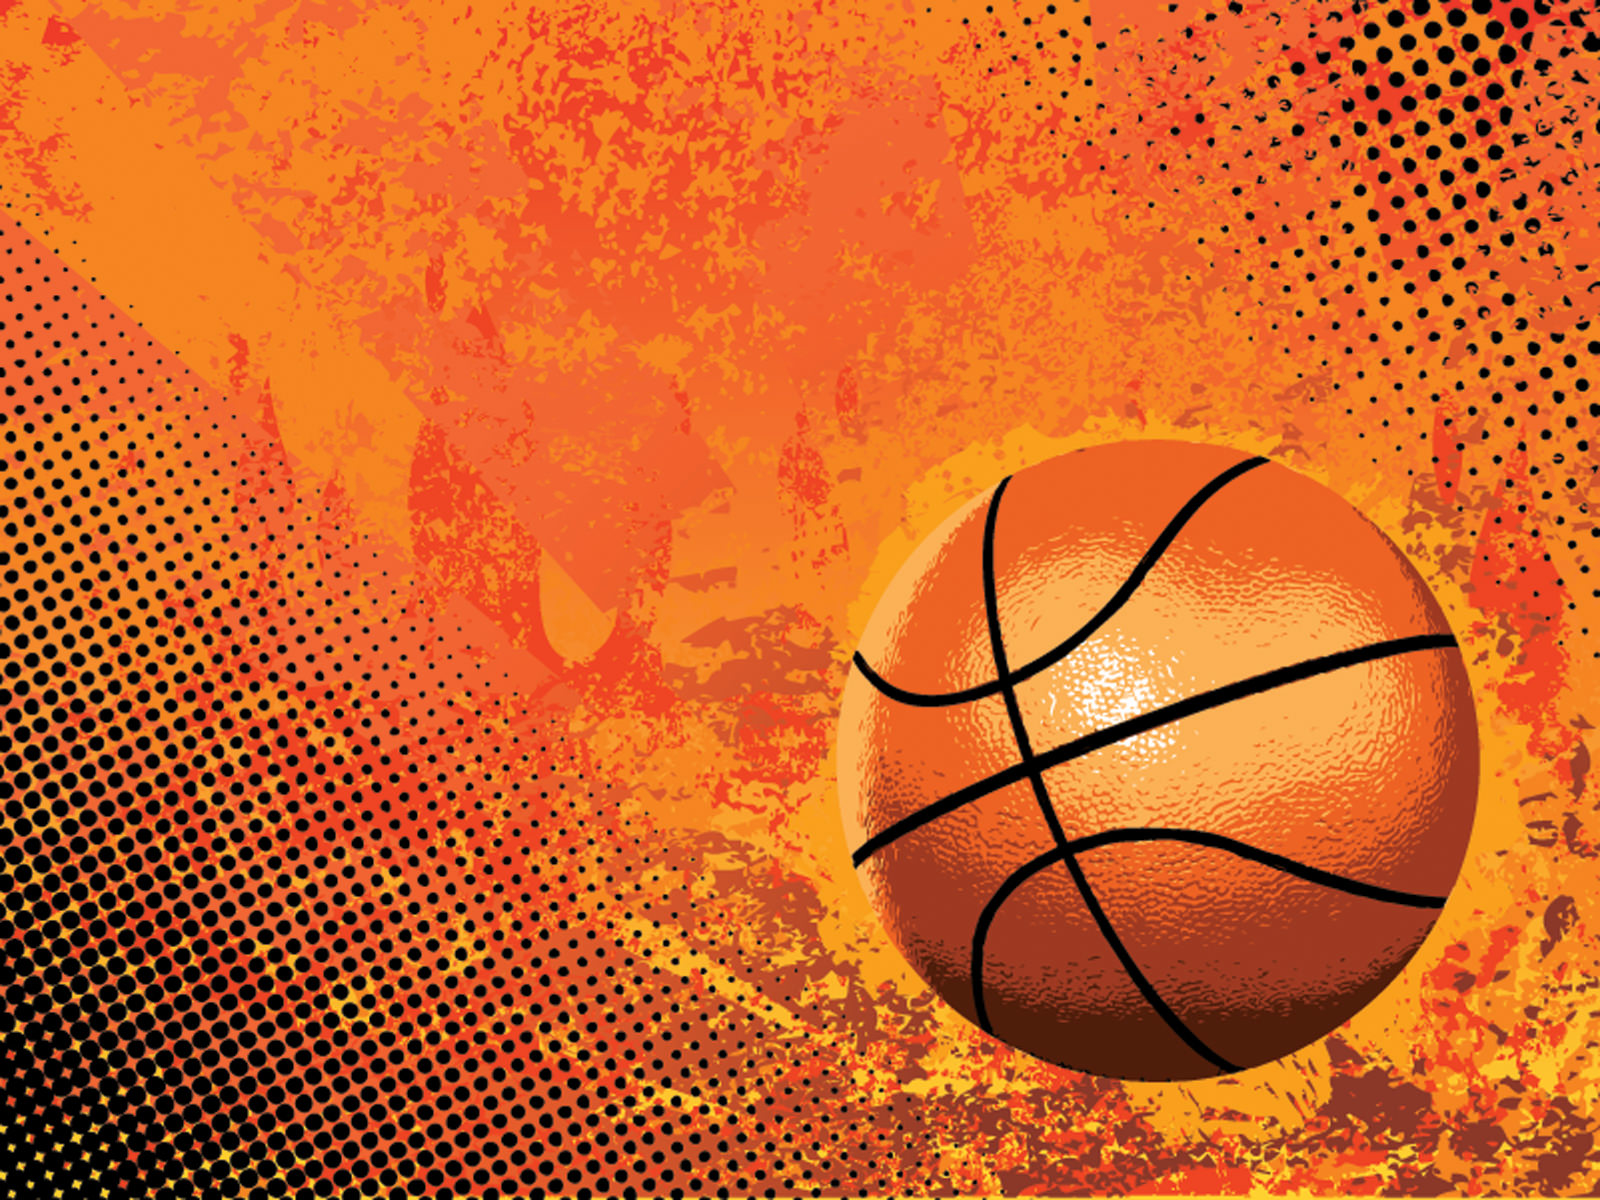 Basketball Background Wallpaper Image Pictures